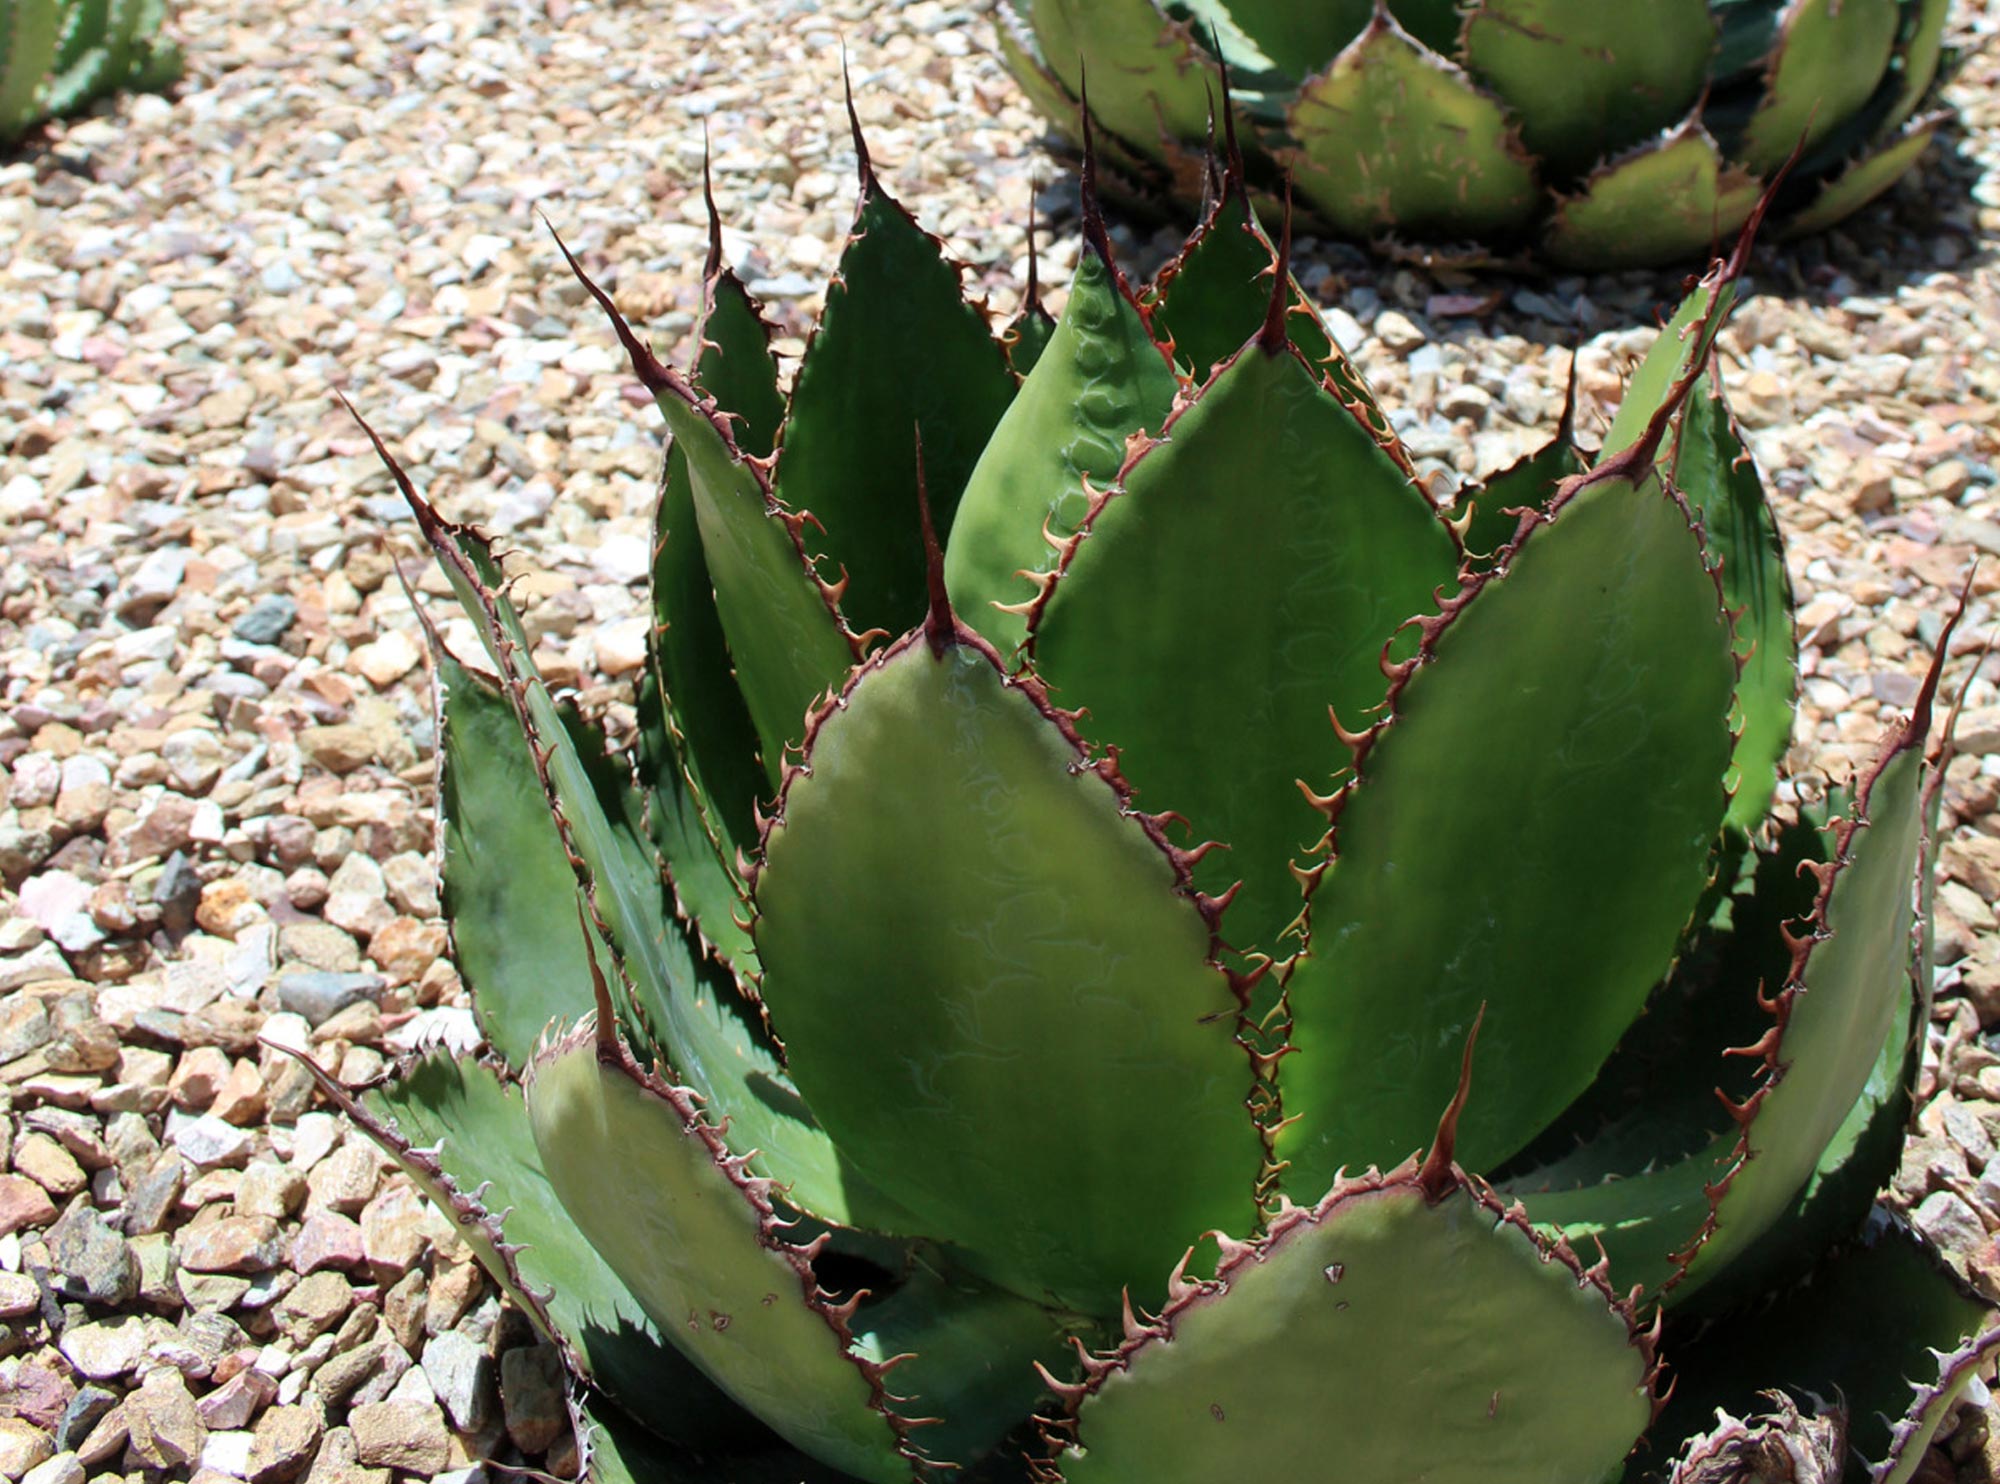 Agave and Cactus for sale in the Phoenix area - Desert Horizon Nursery